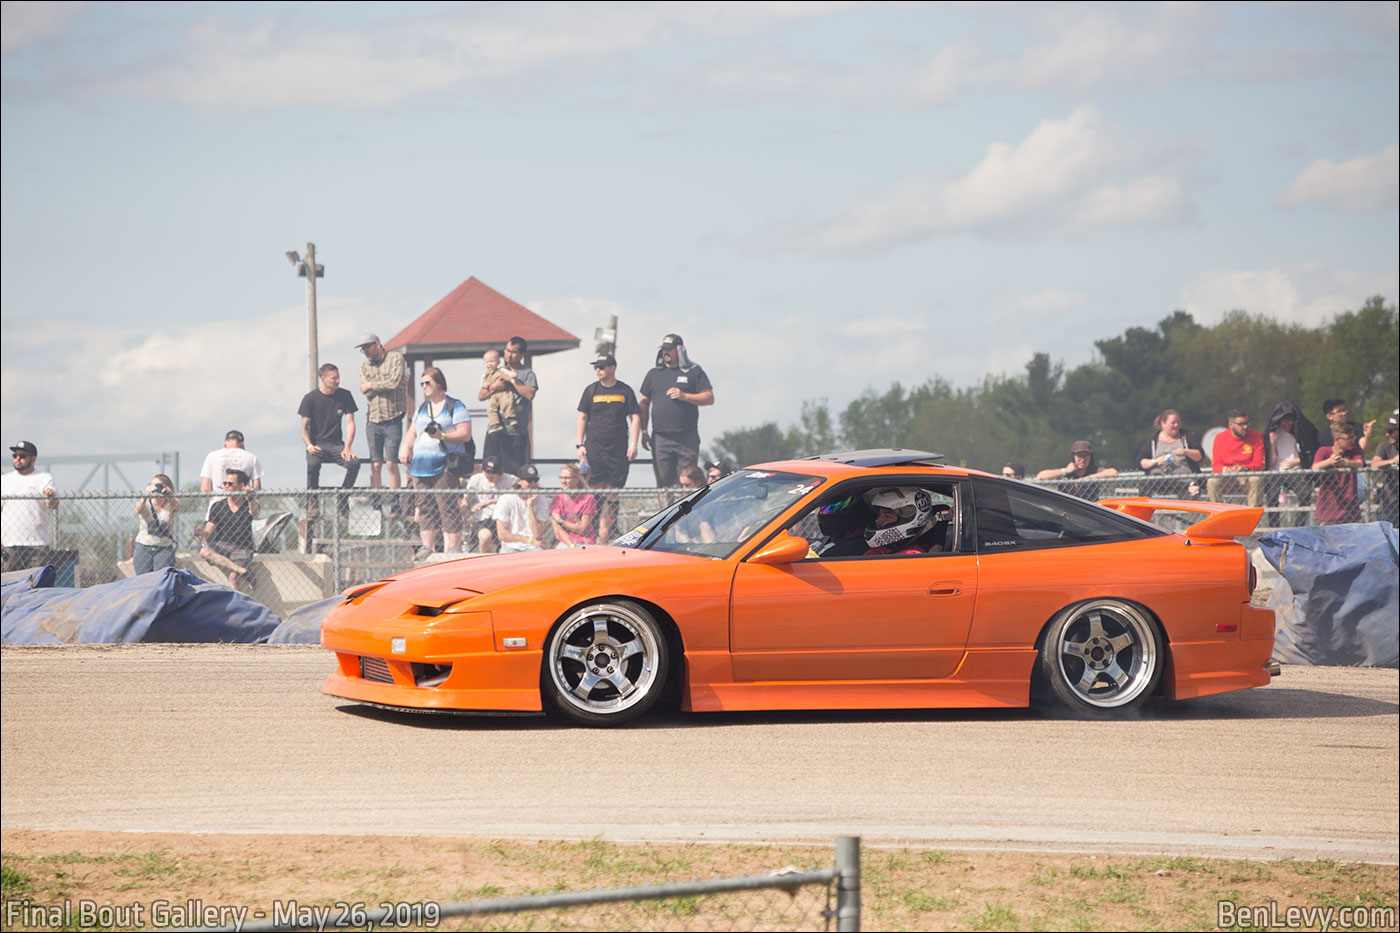 Clean Orange 240SX Drifting at Final Bout Gallery